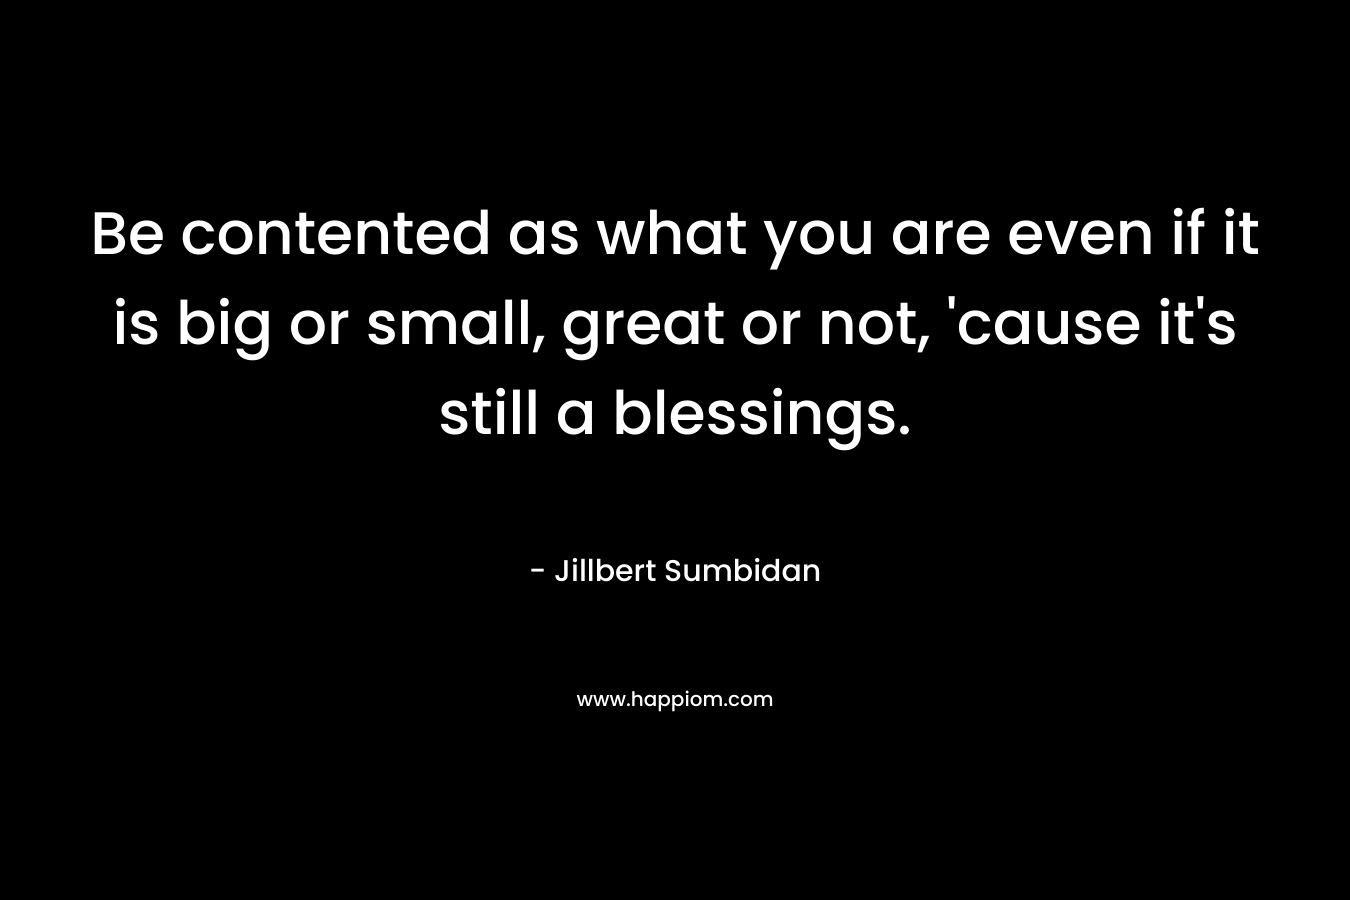 Be contented as what you are even if it is big or small, great or not, ’cause it’s still a blessings. – Jillbert Sumbidan